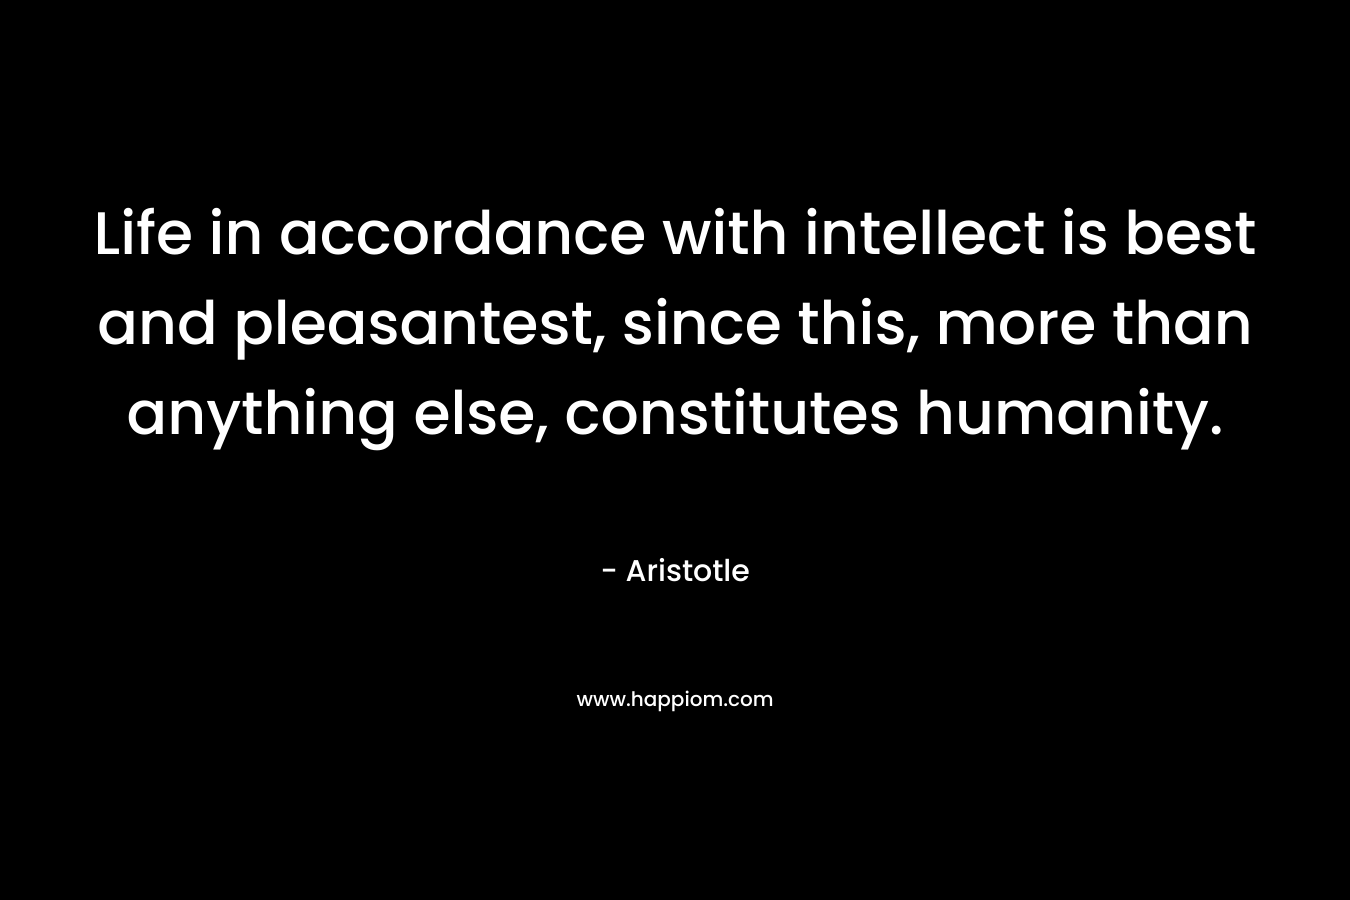 Life in accordance with intellect is best and pleasantest, since this, more than anything else, constitutes humanity.